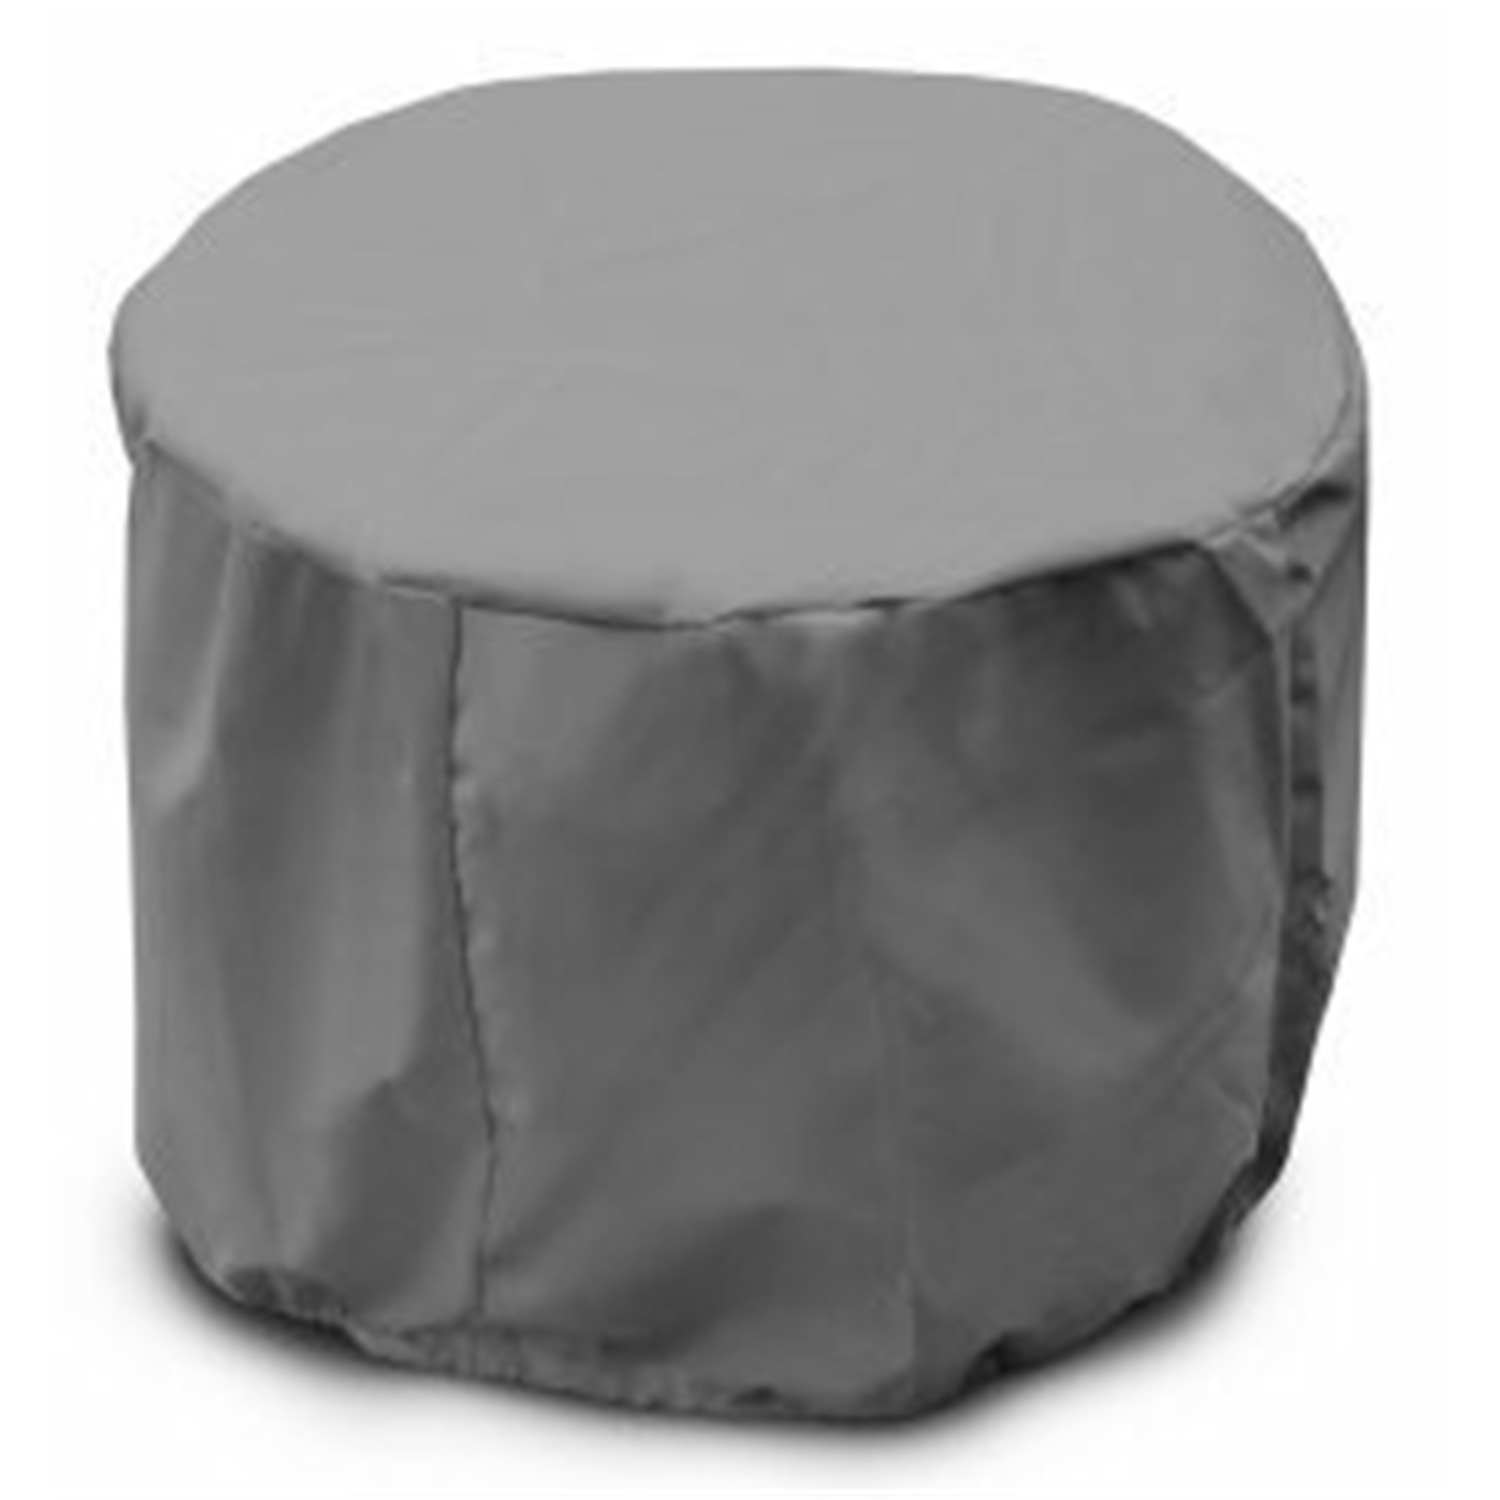 KoverRoos 94262 Weathermax Round Table Cover, Chocolate - 22 Dia x 15 H in. - image 1 of 2